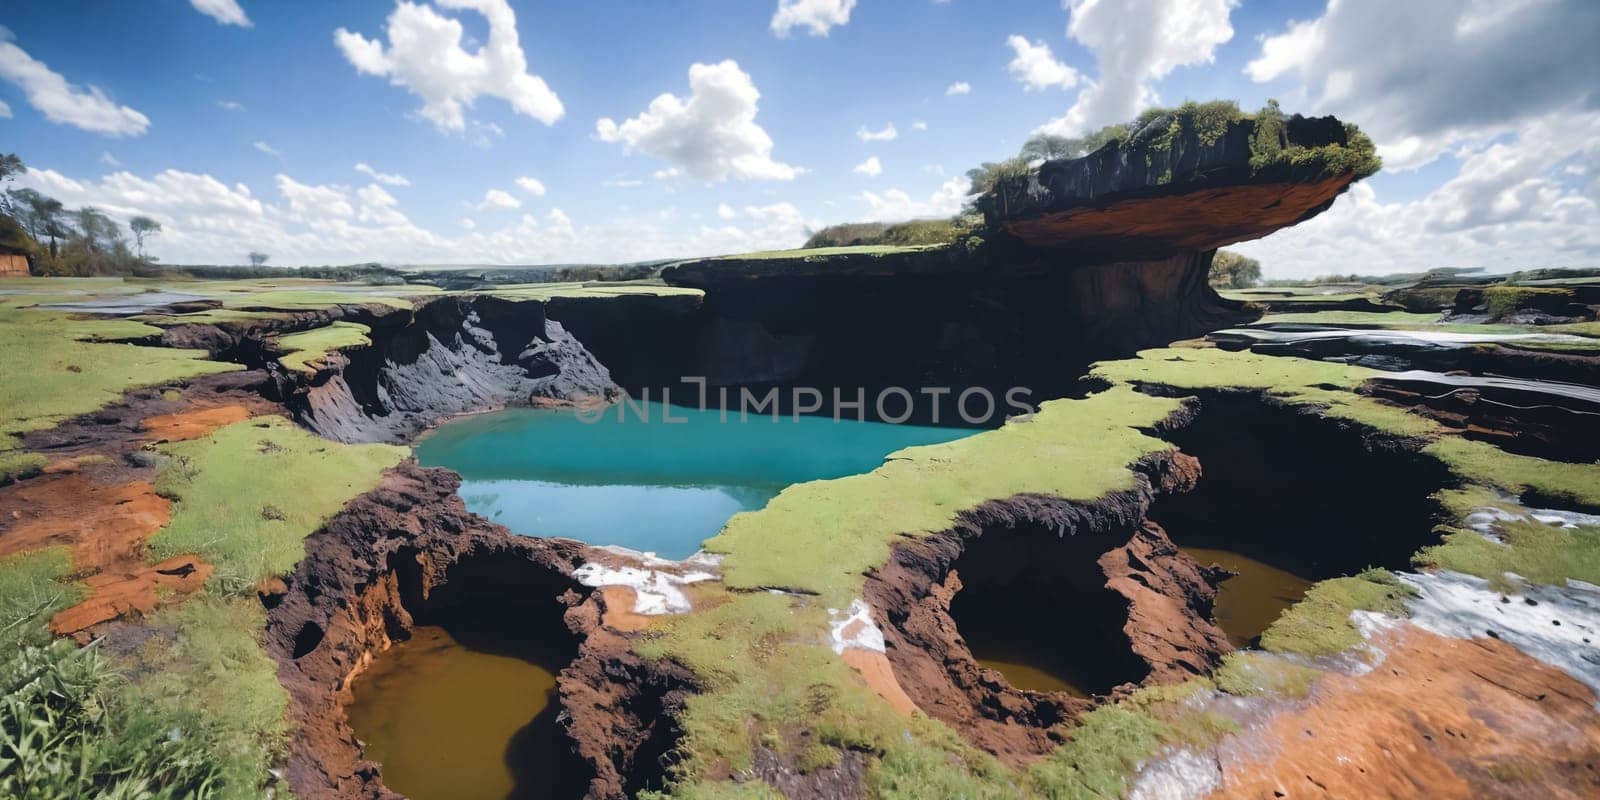 The surreal sight of a sinkhole swallowing up a section of land, showcasing the sudden and dramatic geological event with a focus on the gaping hole and crumbling surroundings. Panorama